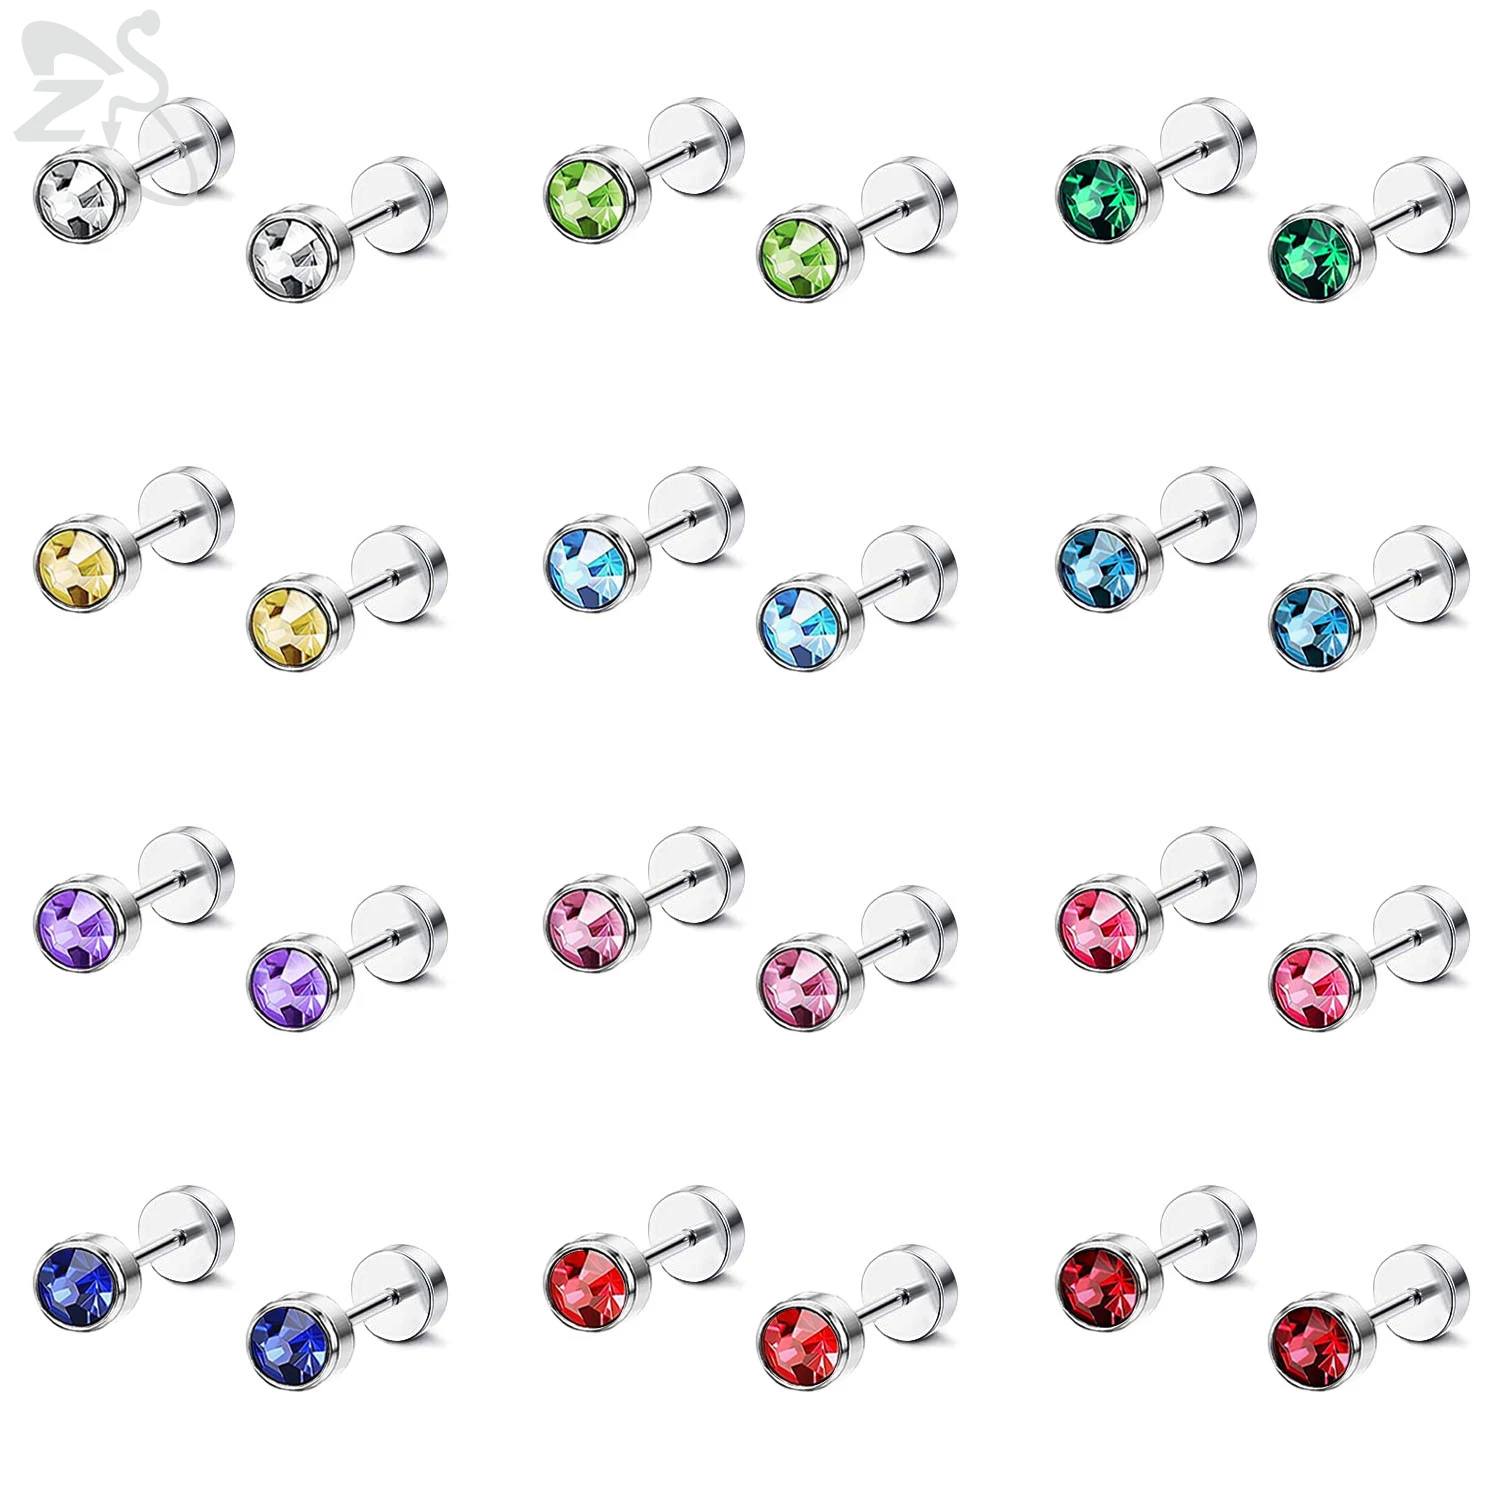 

ZS 12 Pair/lot Colorful Cubic Zirconia Round Stud Earring Set For Women Children Stainless Steel Helix Conch Tragus Piercing 20g